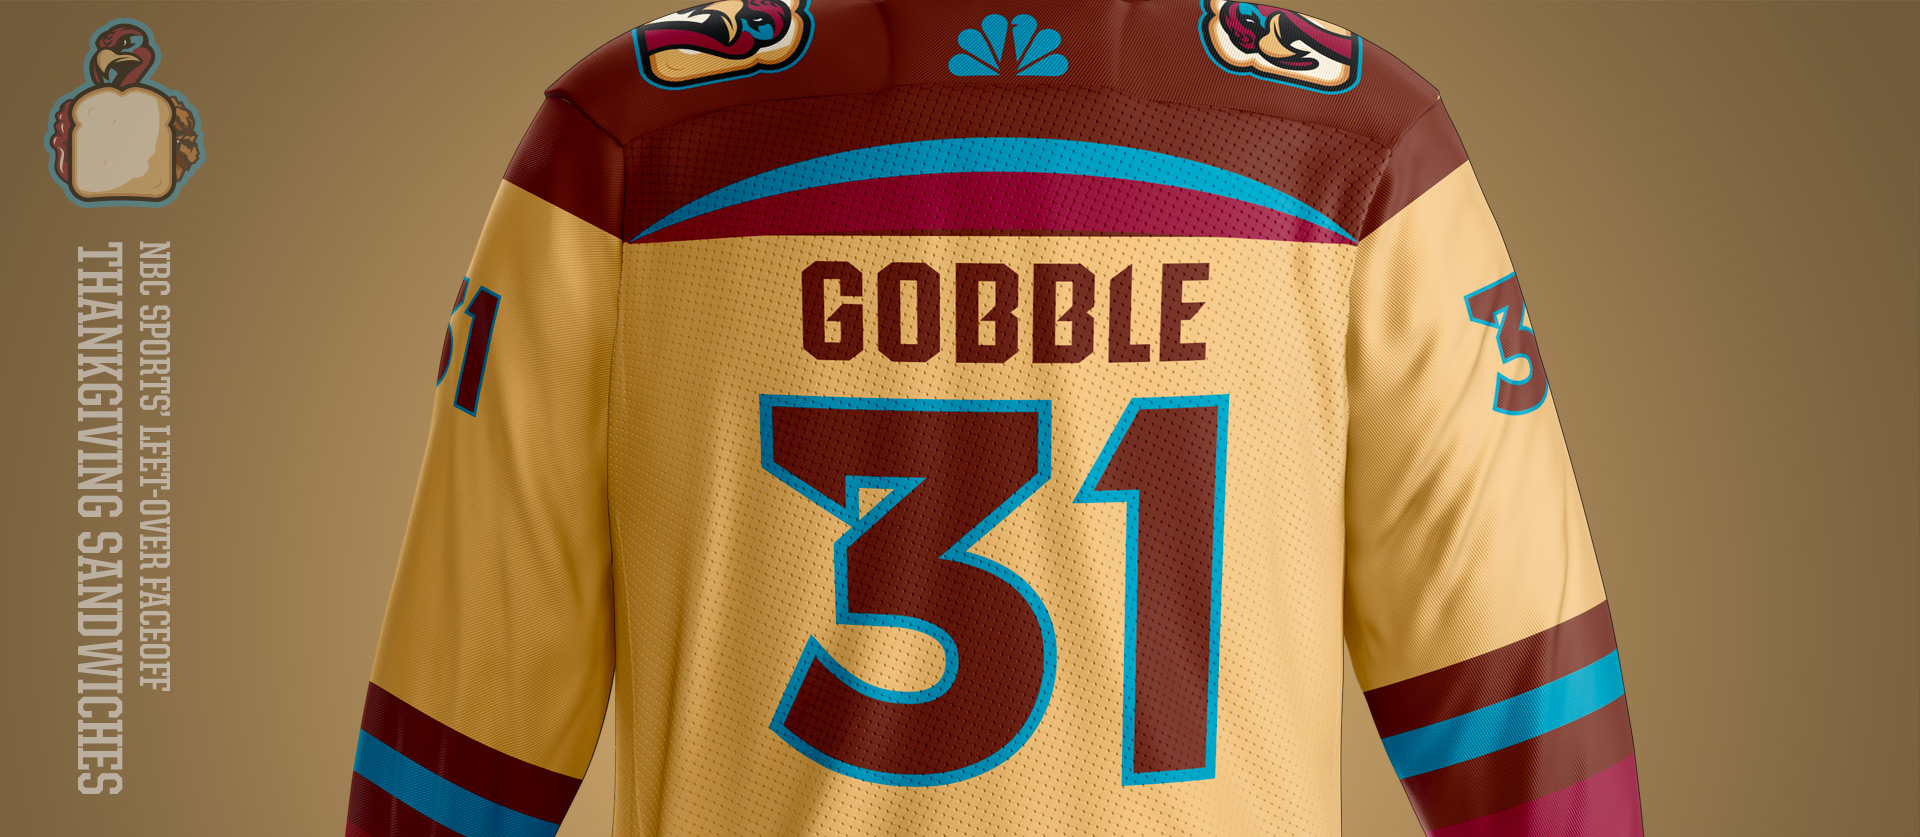 Thanksgiving Sandwich Front - Football Uniform Design for NBC Sports Thanksgiving Second Feast Face-Off